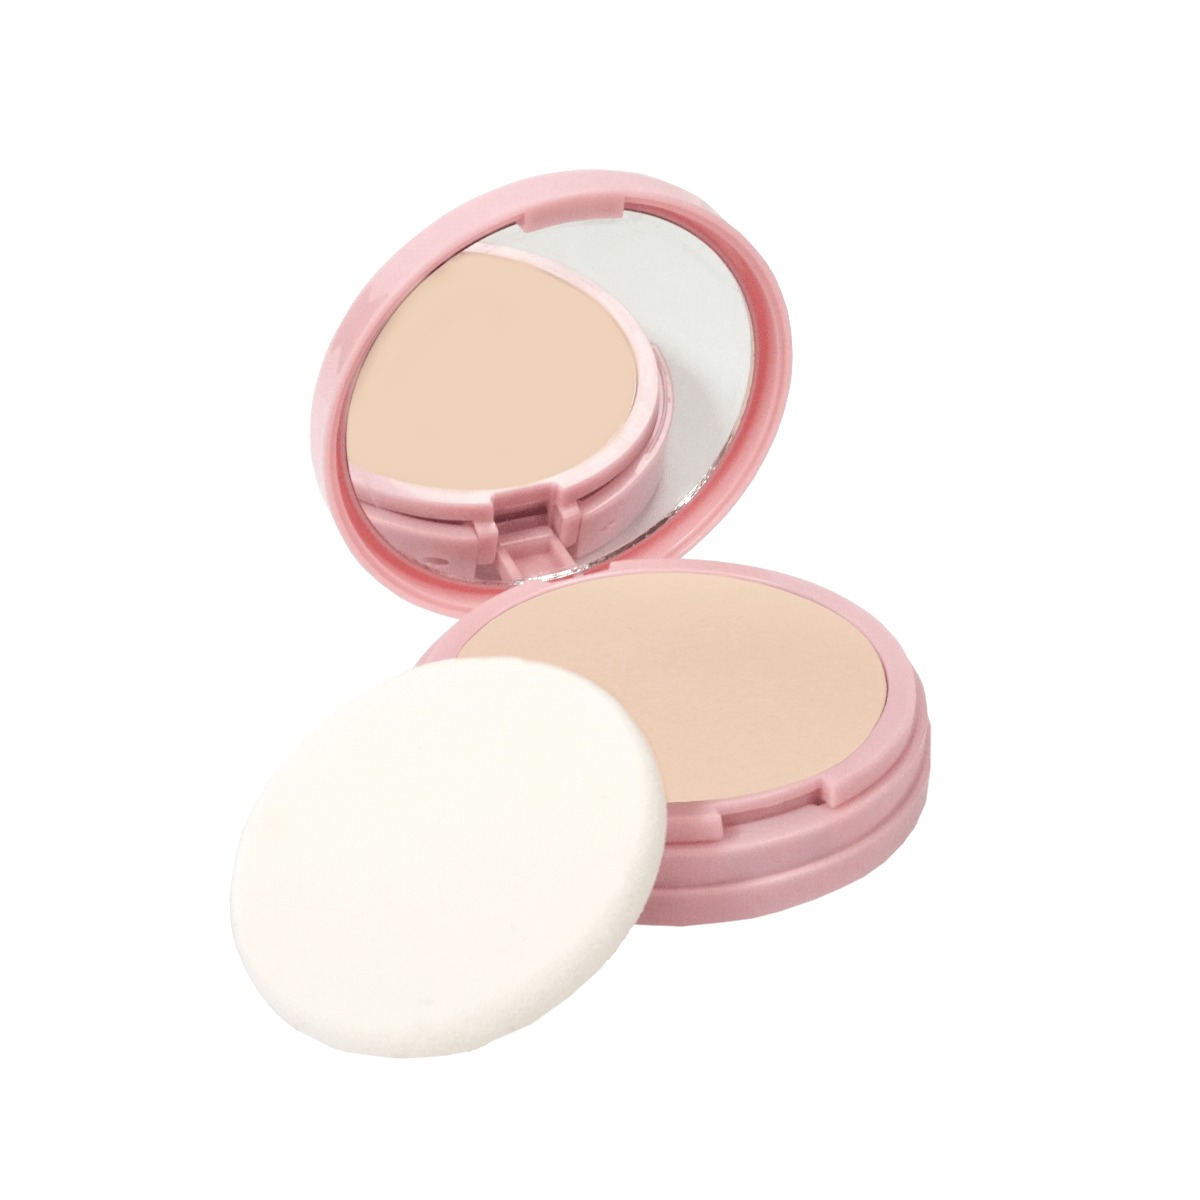 Pink Up - Mineral Cover Natural 12 Unidades